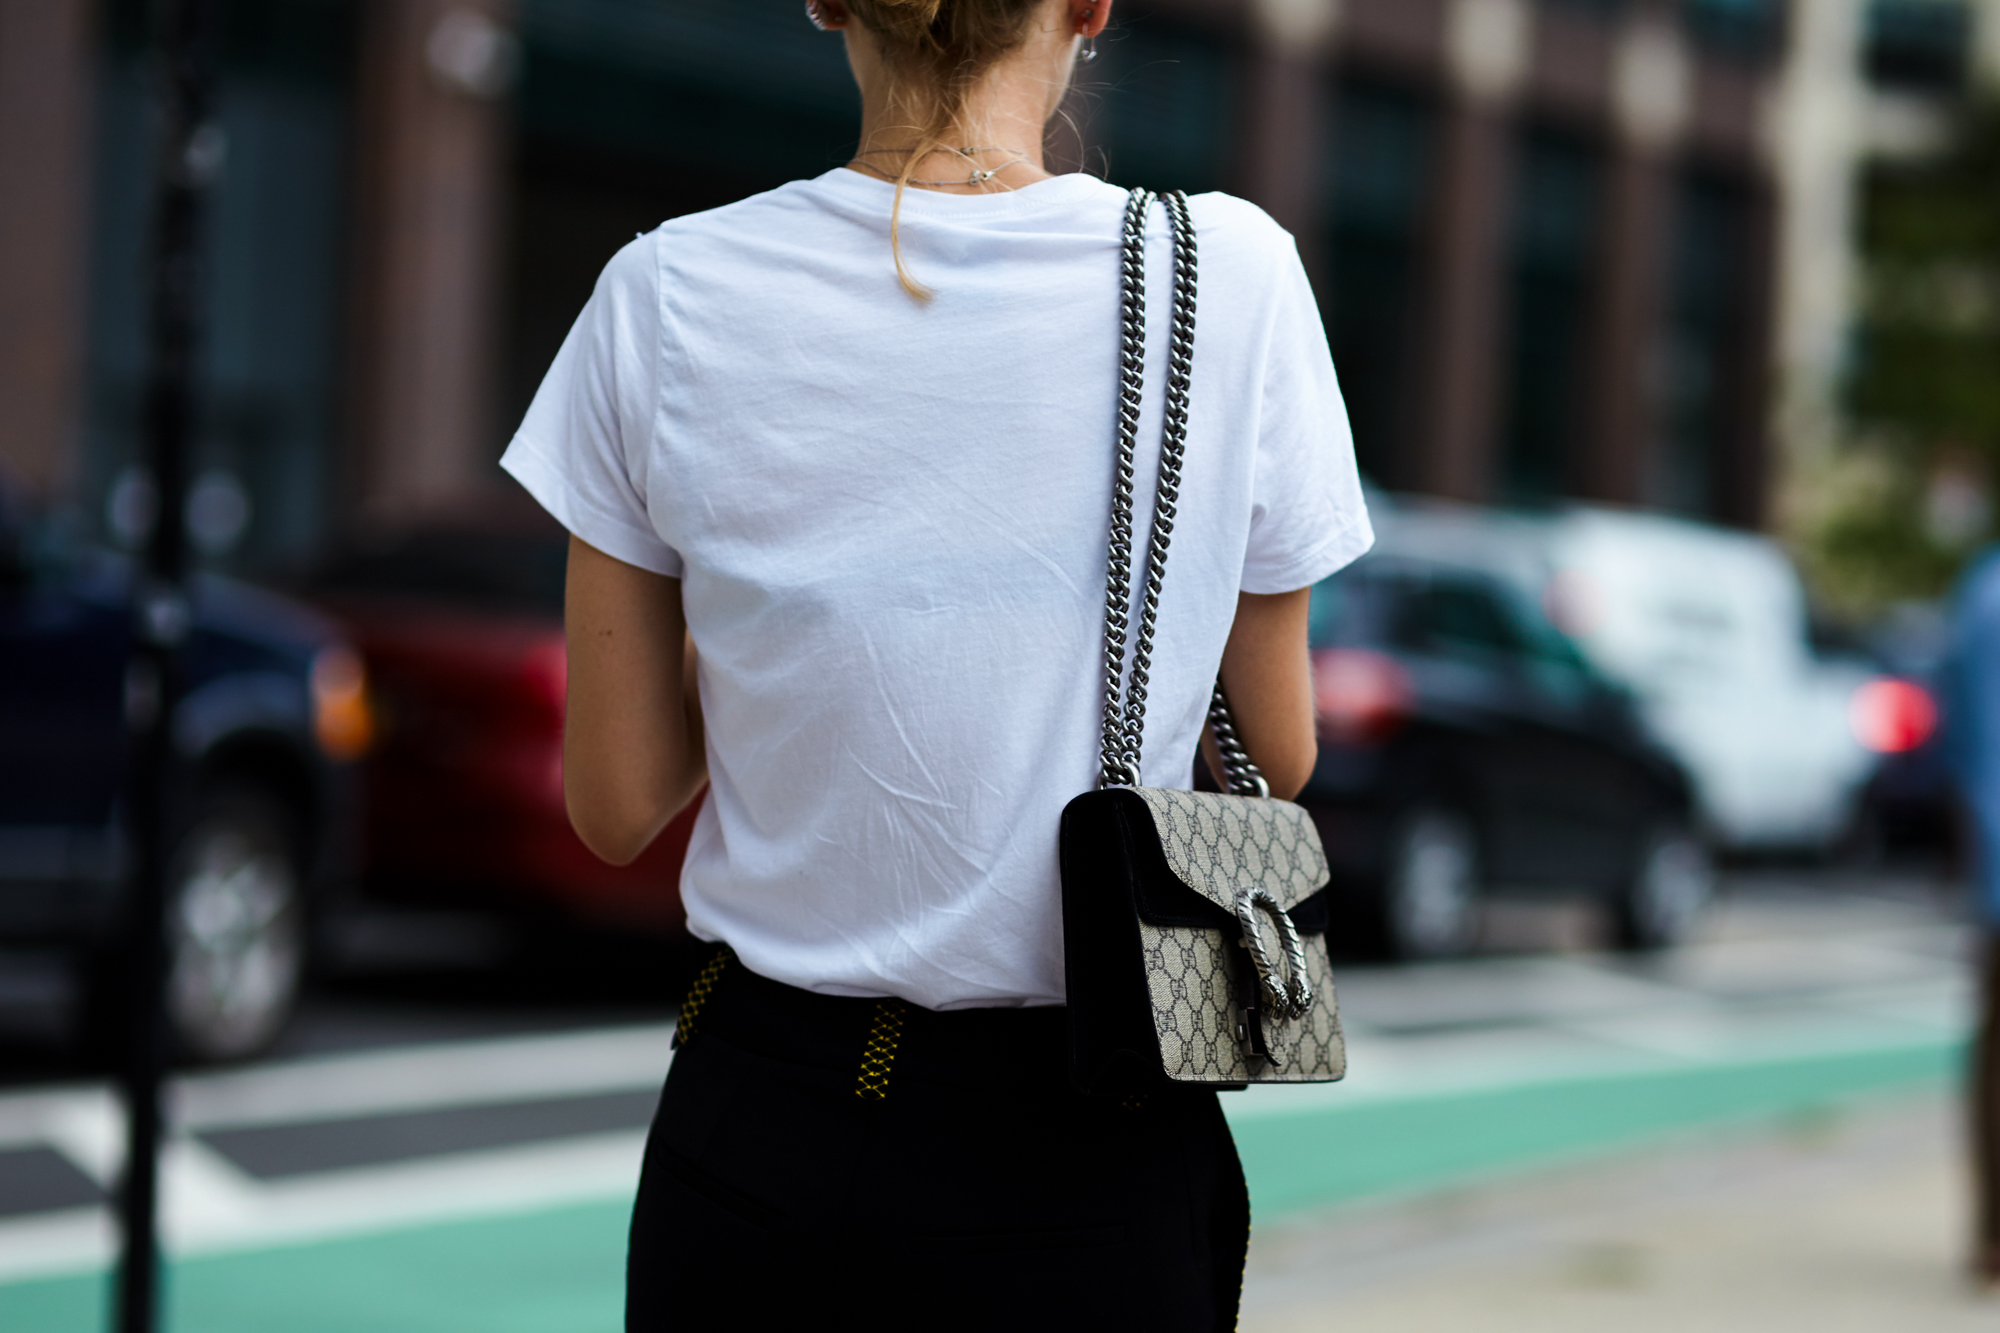 NYFW Spring-Summer 2017 Streetstyle: Jessica Minkoff wearing white t-shirt and a Gucci bag after a show in New York, September 2016